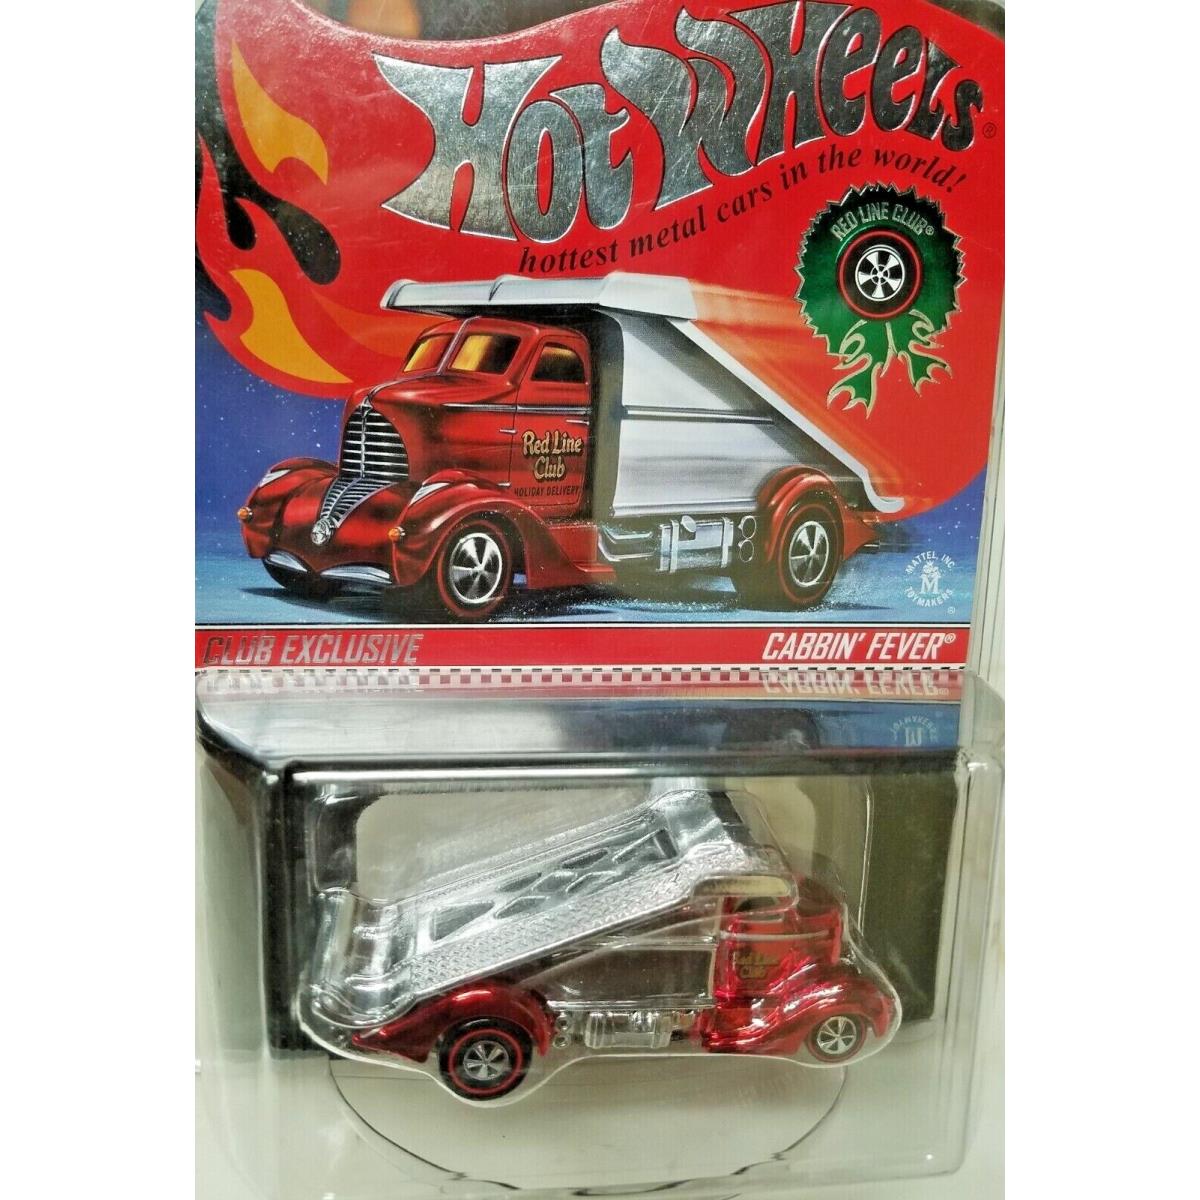 Hot Wheels Redline Club Exclusive 2015 Holiday Car Cabbin Fever